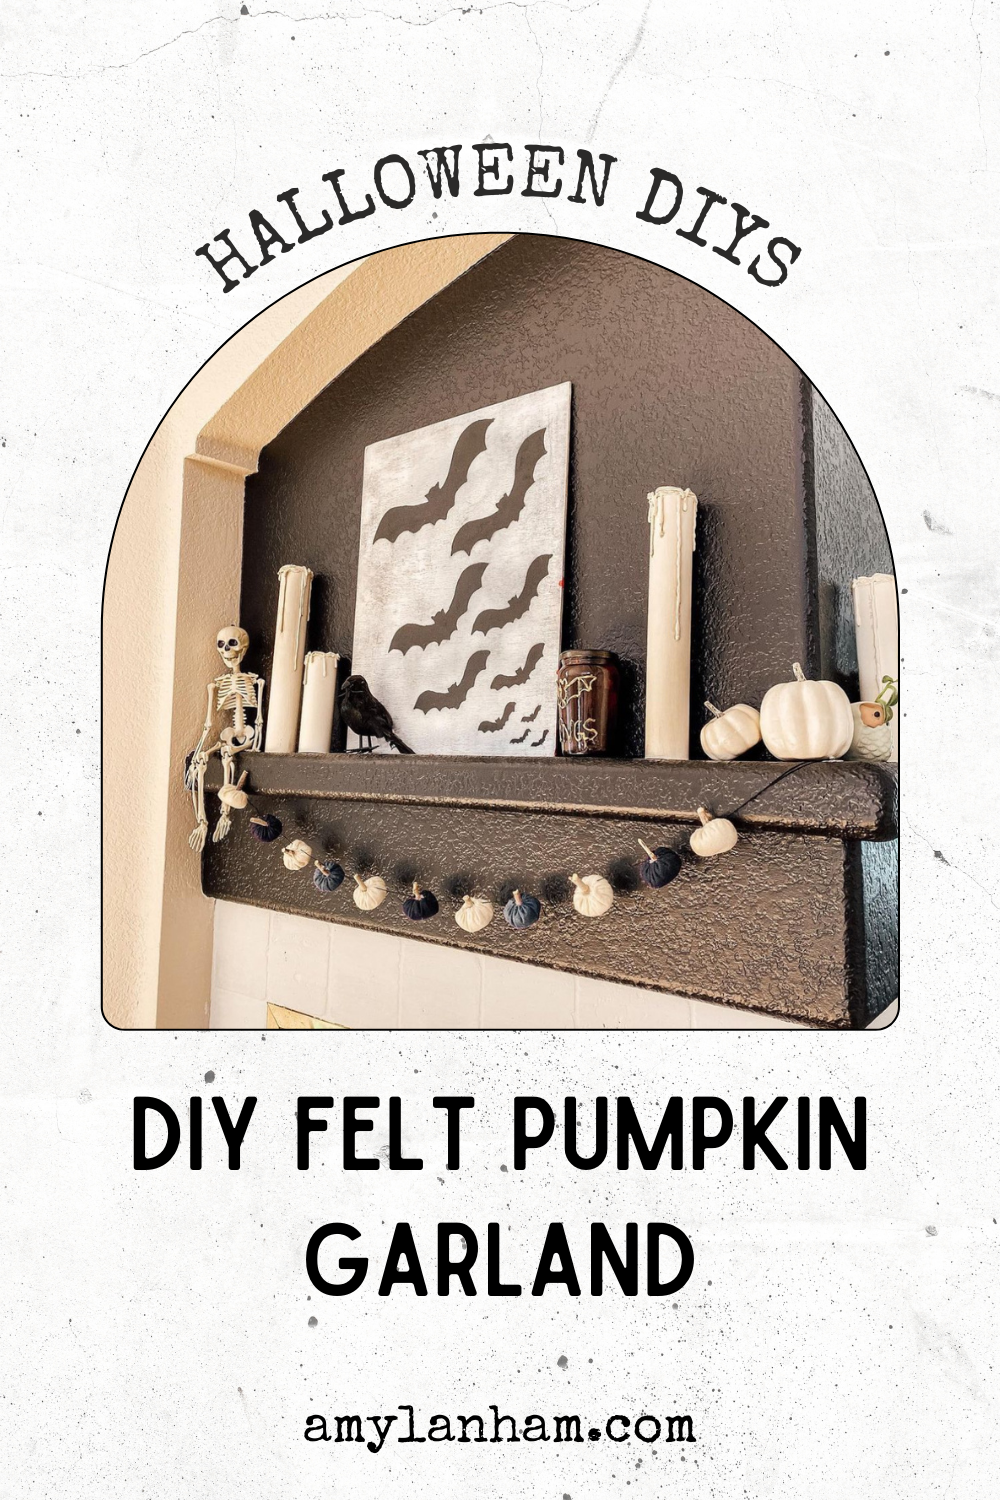 Pumpkin garland hanging on a black fireplace with other halloween decor sitting on the mantel.